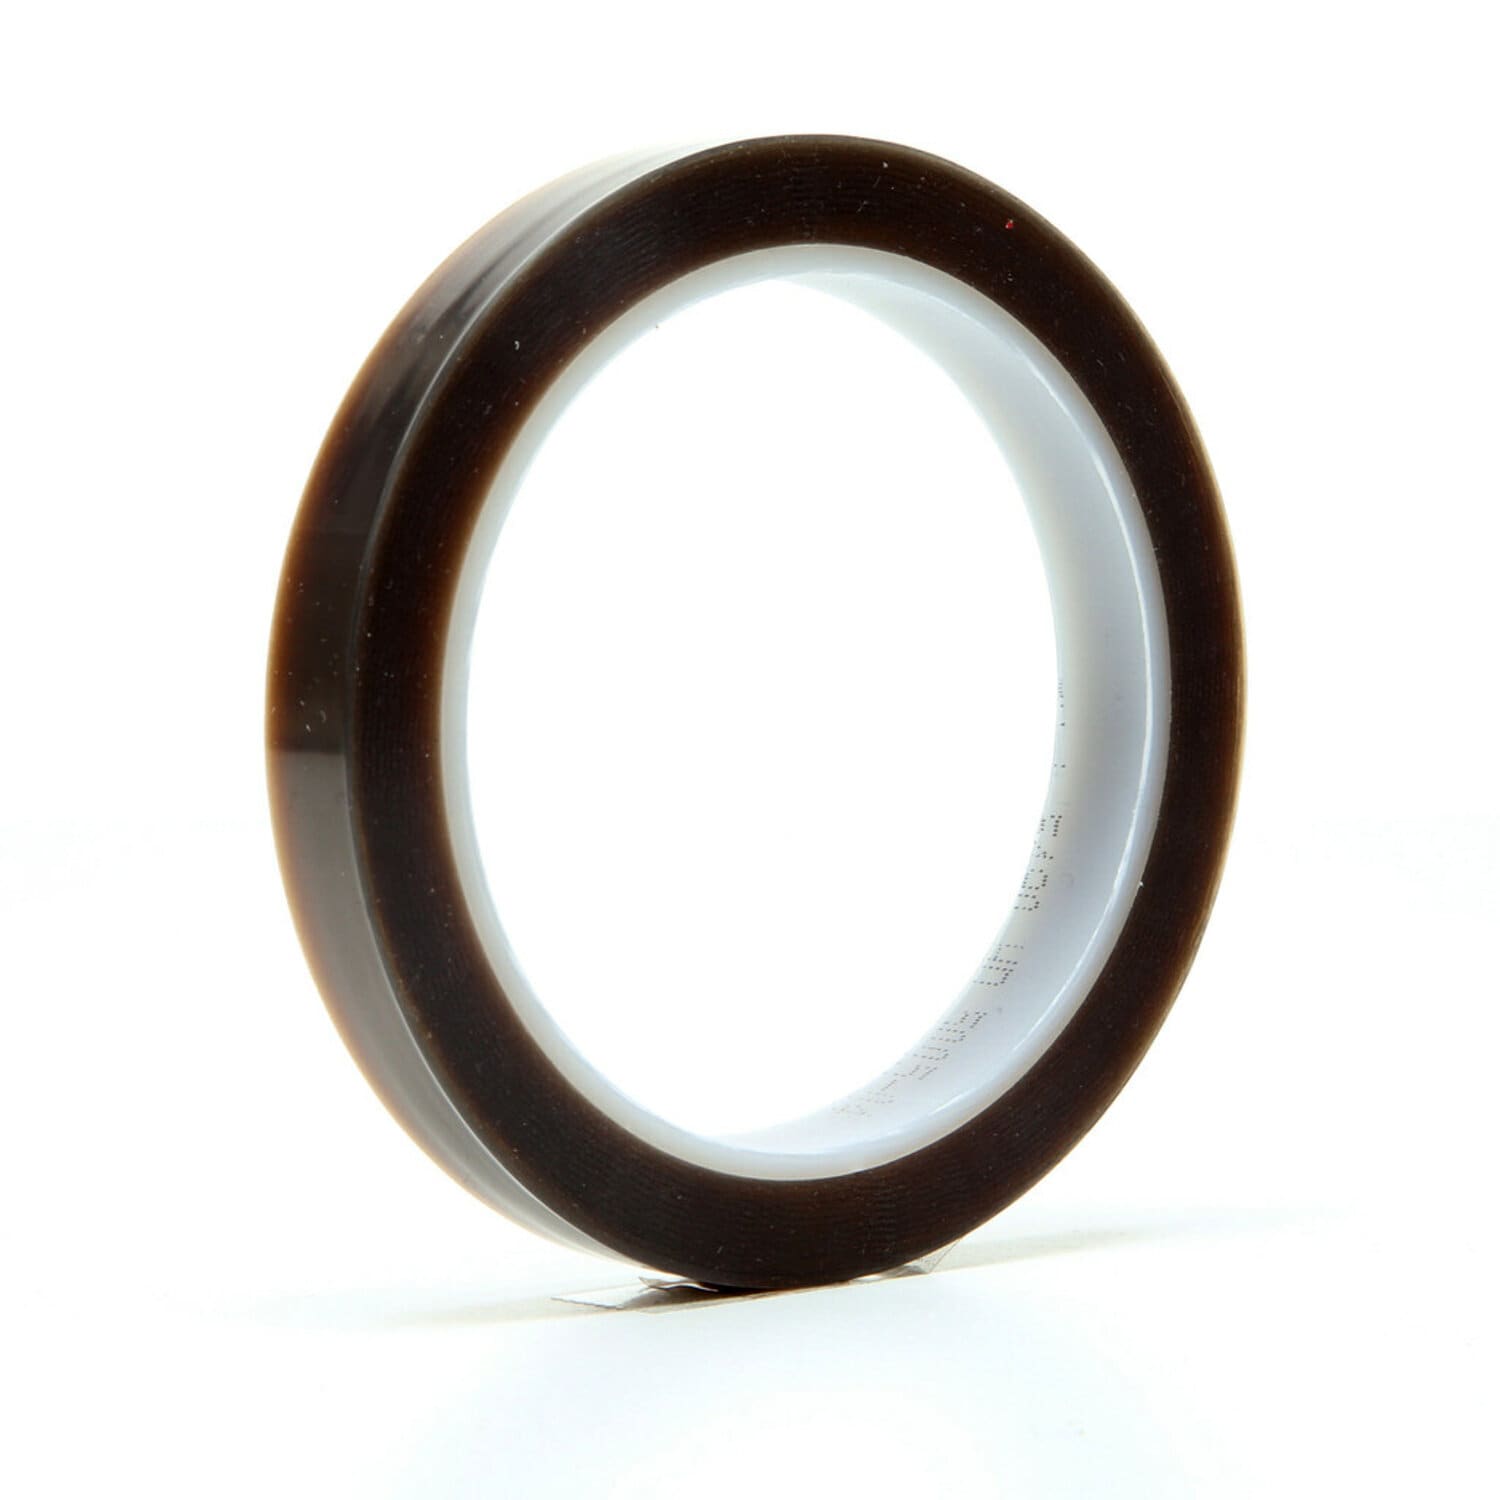 7100116825 - 3M PTFE Film Tape 5490, Brown, 3.7 mil, Roll, Config